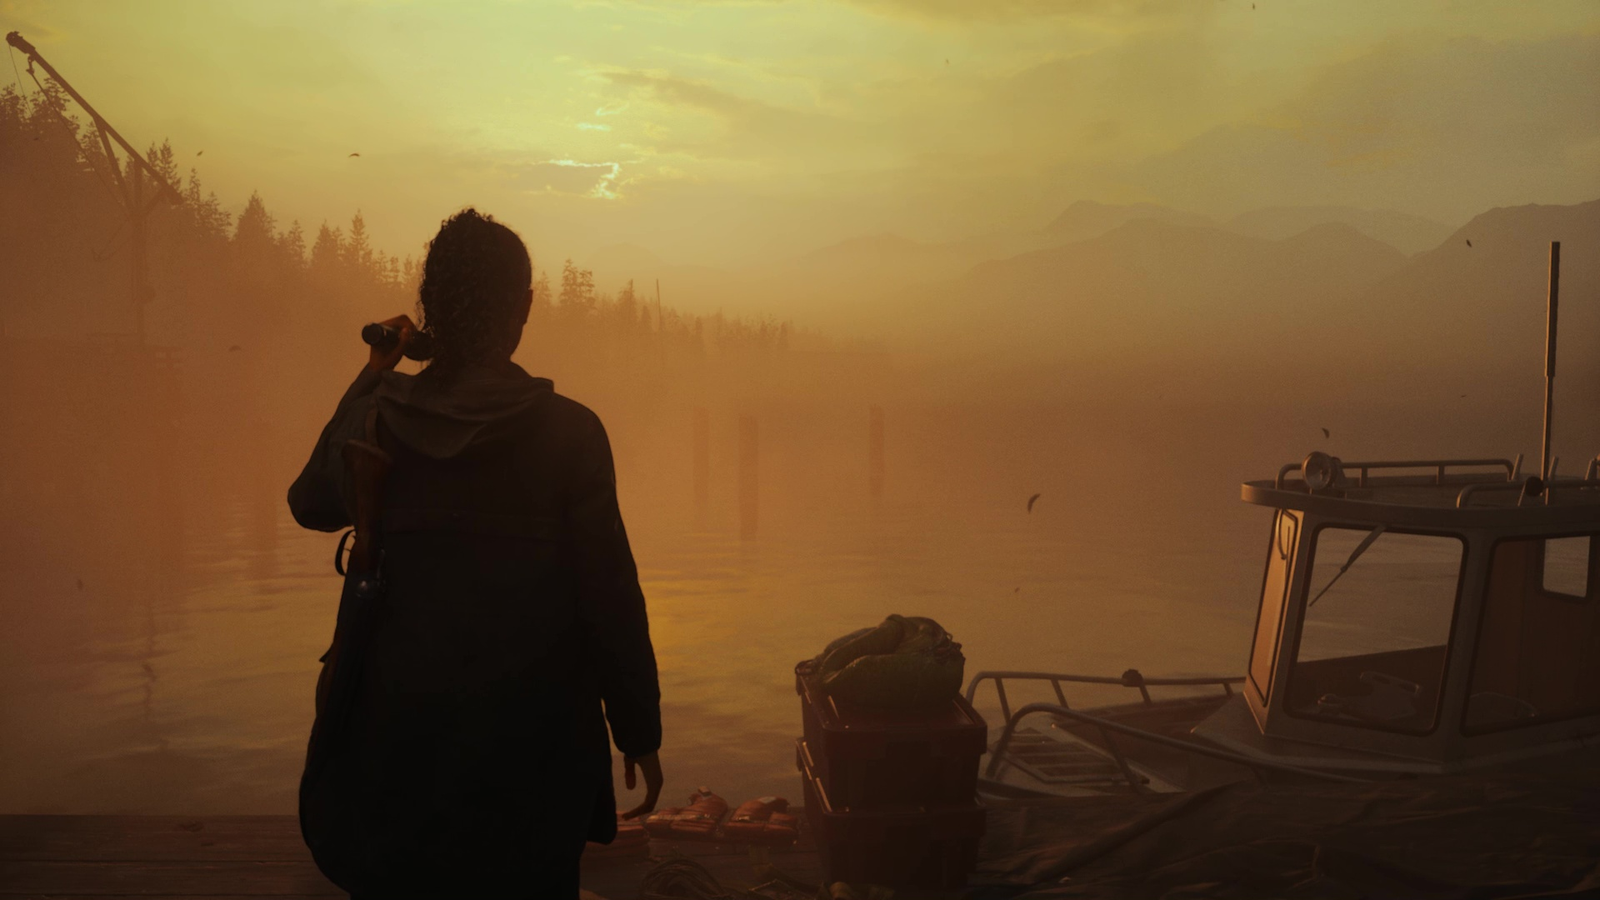 Remedy confirms Alan Wake 2 release date and DLC - Xfire